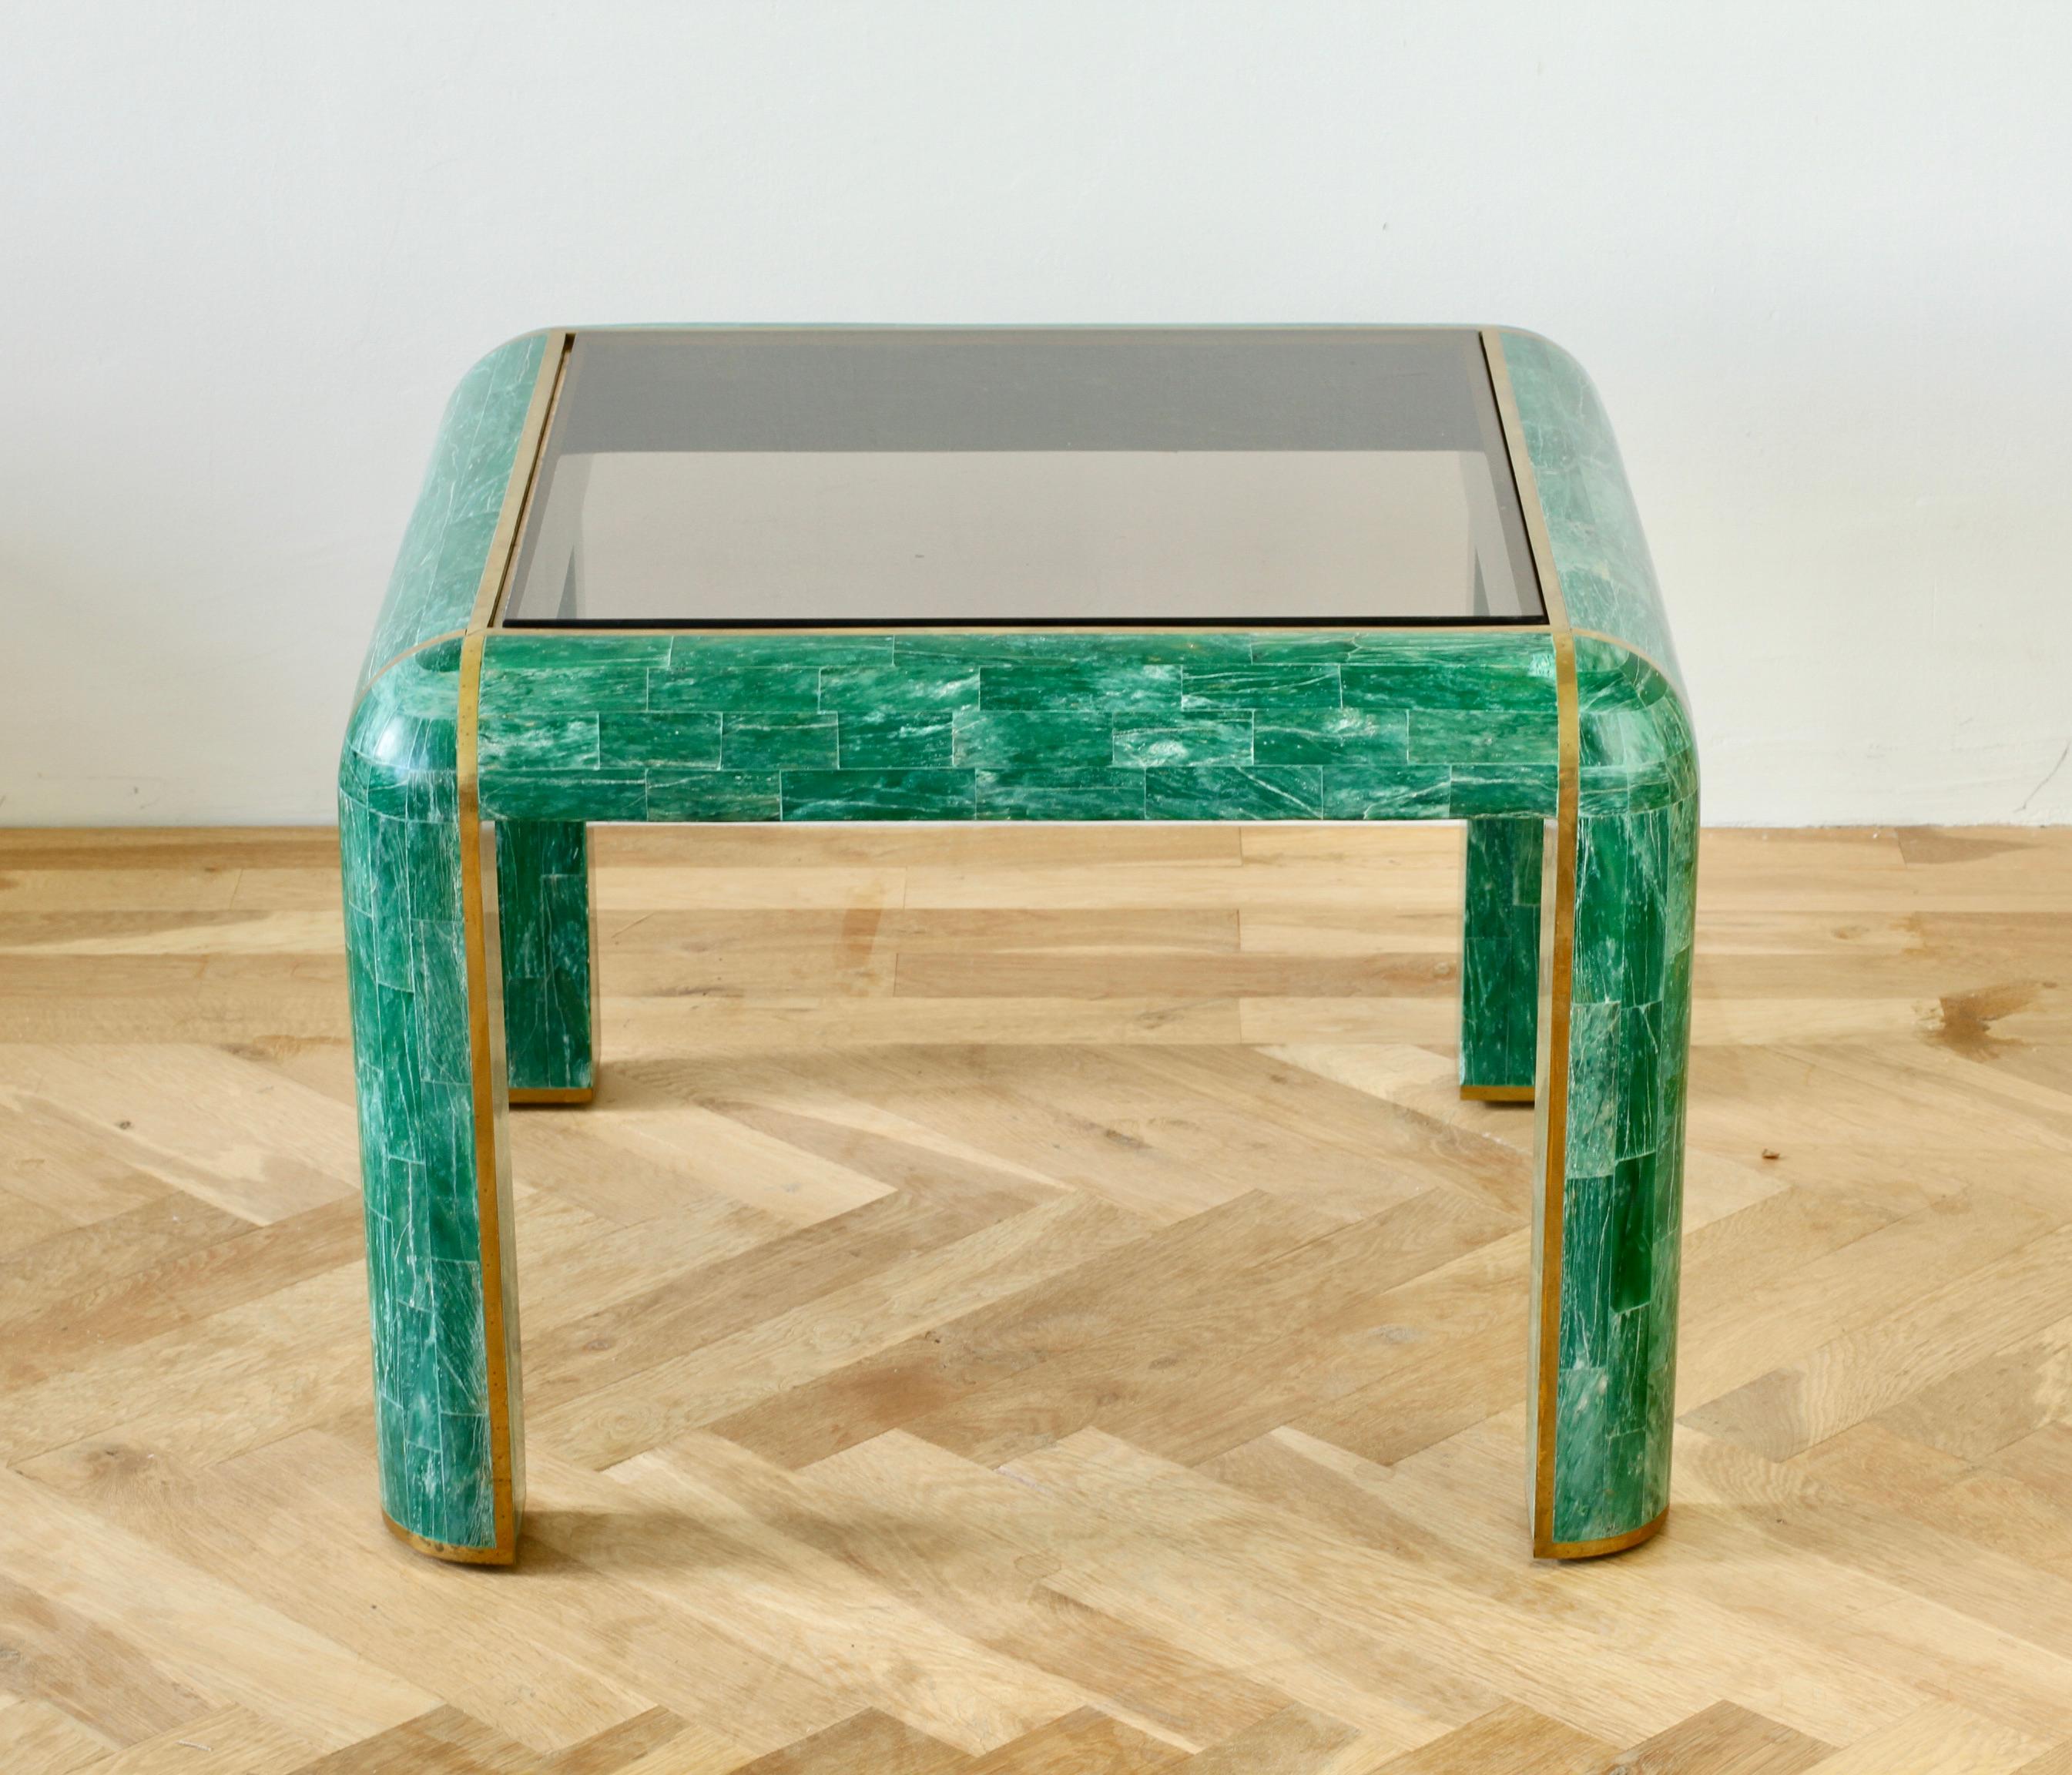 Inlay Mid-Century Green Tessellated Stone and Brass Side Table by Casa Bique, c. 1970s